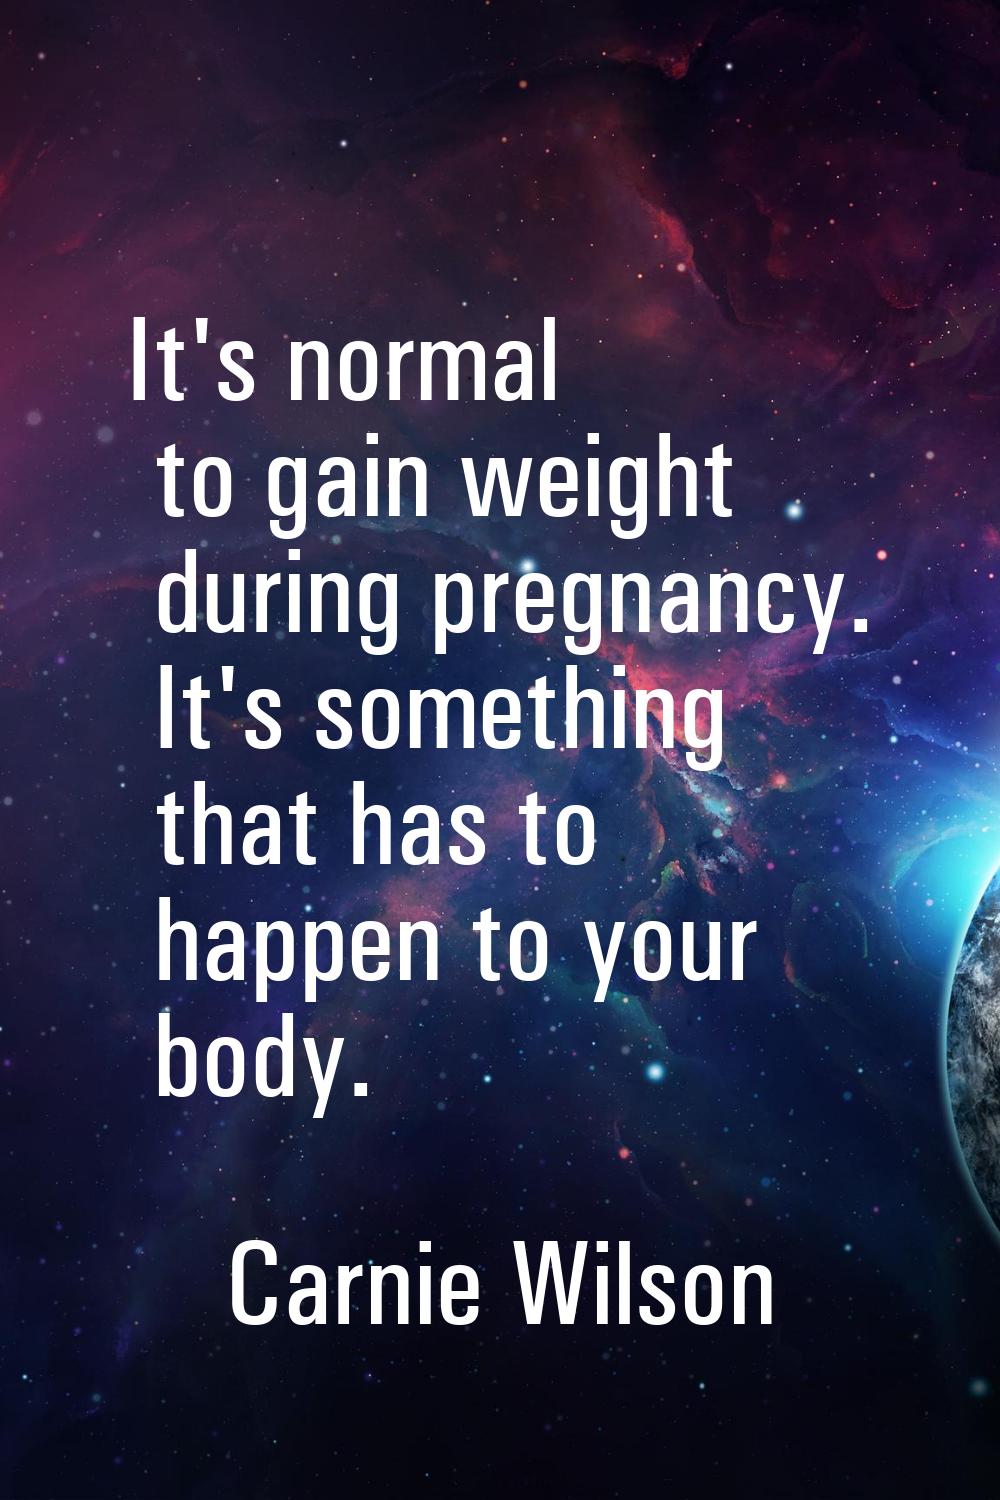 It's normal to gain weight during pregnancy. It's something that has to happen to your body.